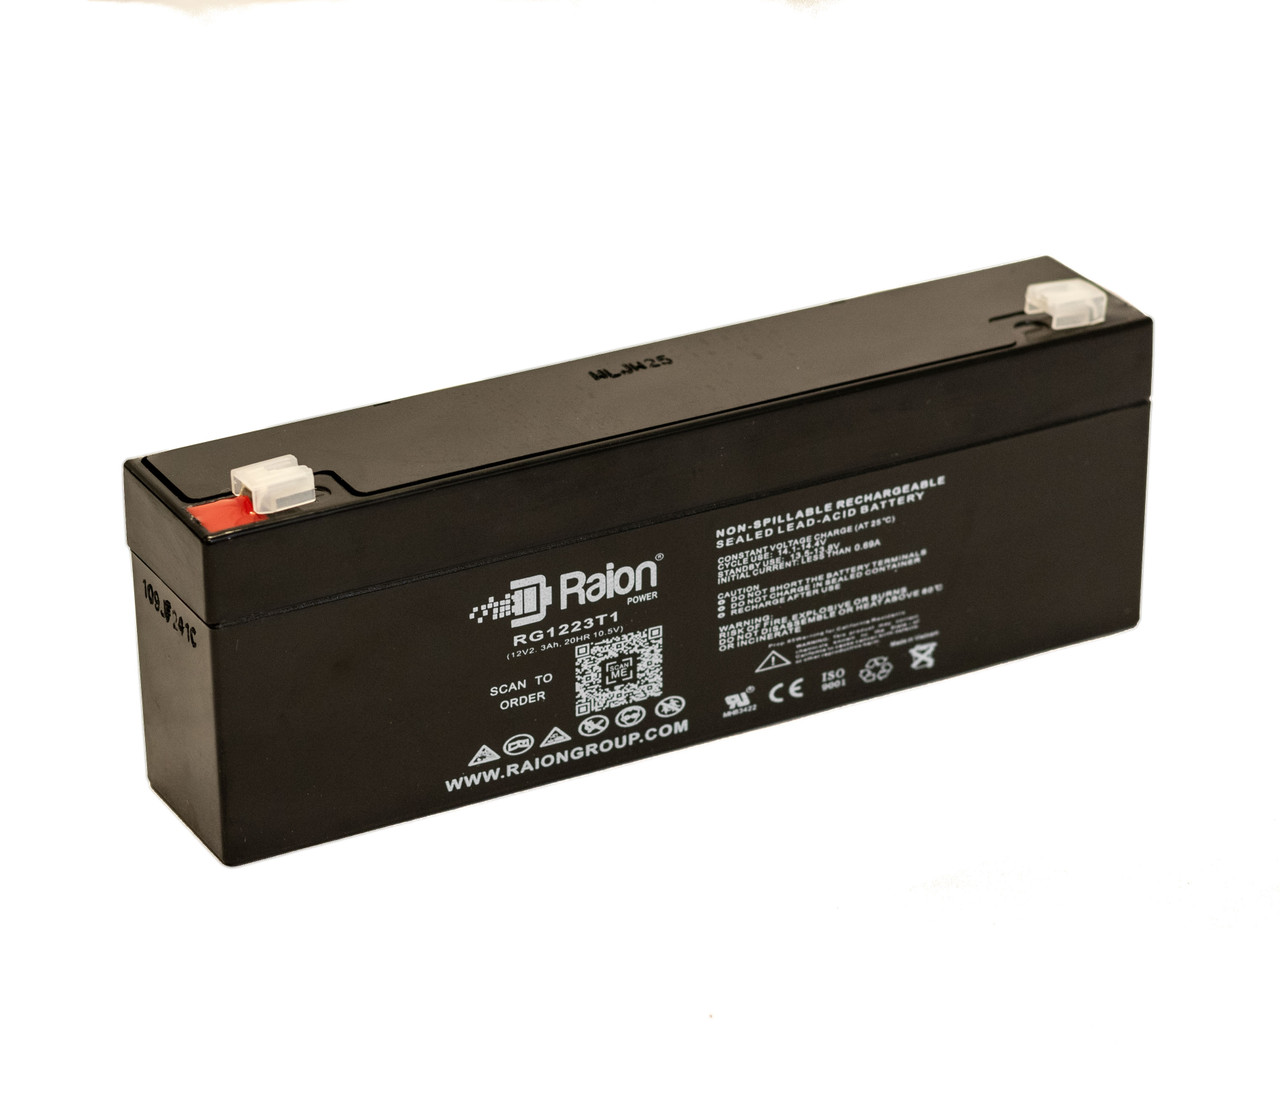 Raion Power RG1223T1 Replacement Battery for Sealed Lead Acid 12 Volt 2.3 Amp